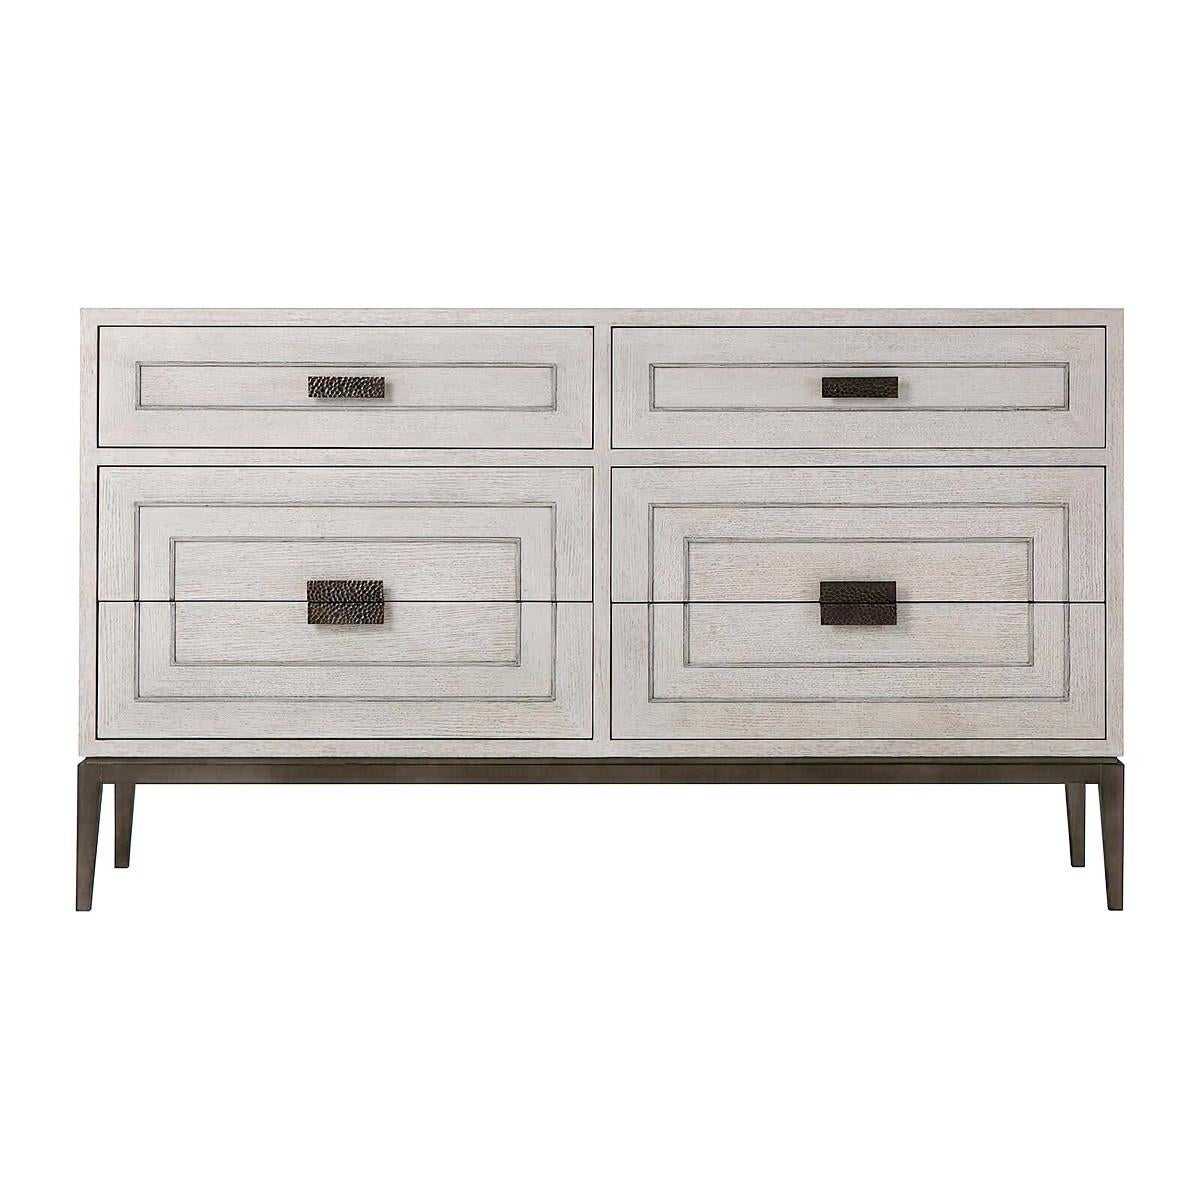 Modern light oak dresser, a six-drawer chest of drawers in our light brushed oak gowan finish with two frieze drawers above and four larger drawers below. Each with relief inlaid angular centric lines and hammered metal handles with matte tungsten